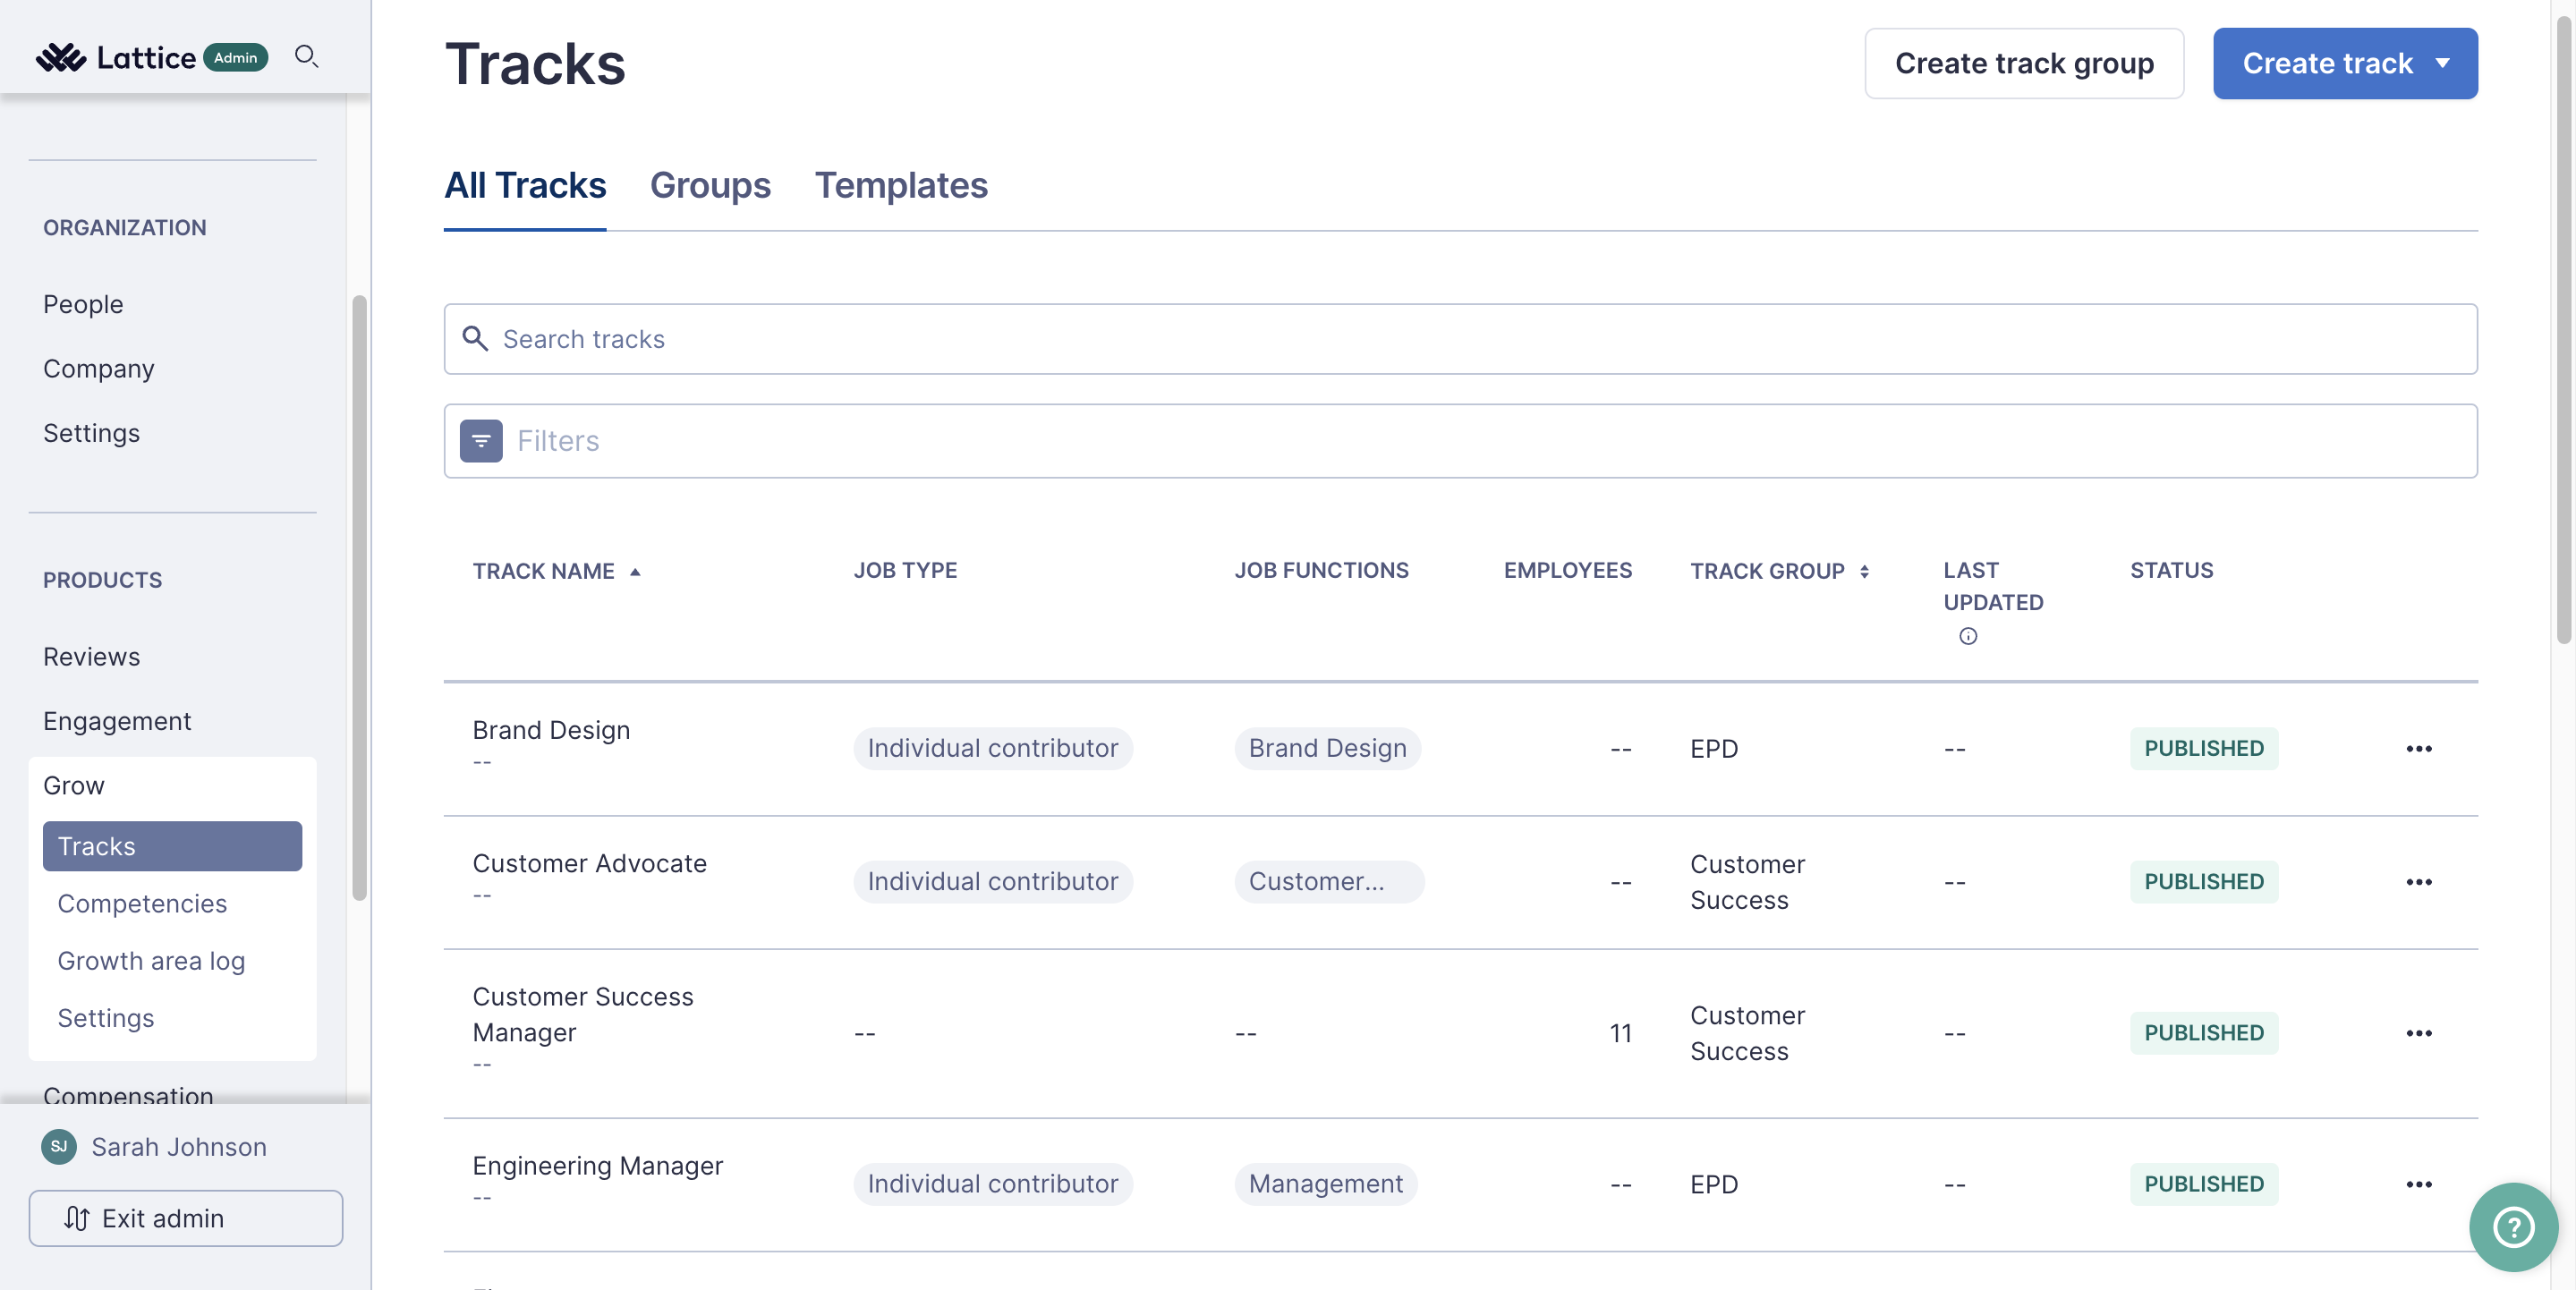 Grow Tracks page. There are two new columns: Job Type and Job Functions. Within the columns the job types and functions that are aligned for each track can be seen.